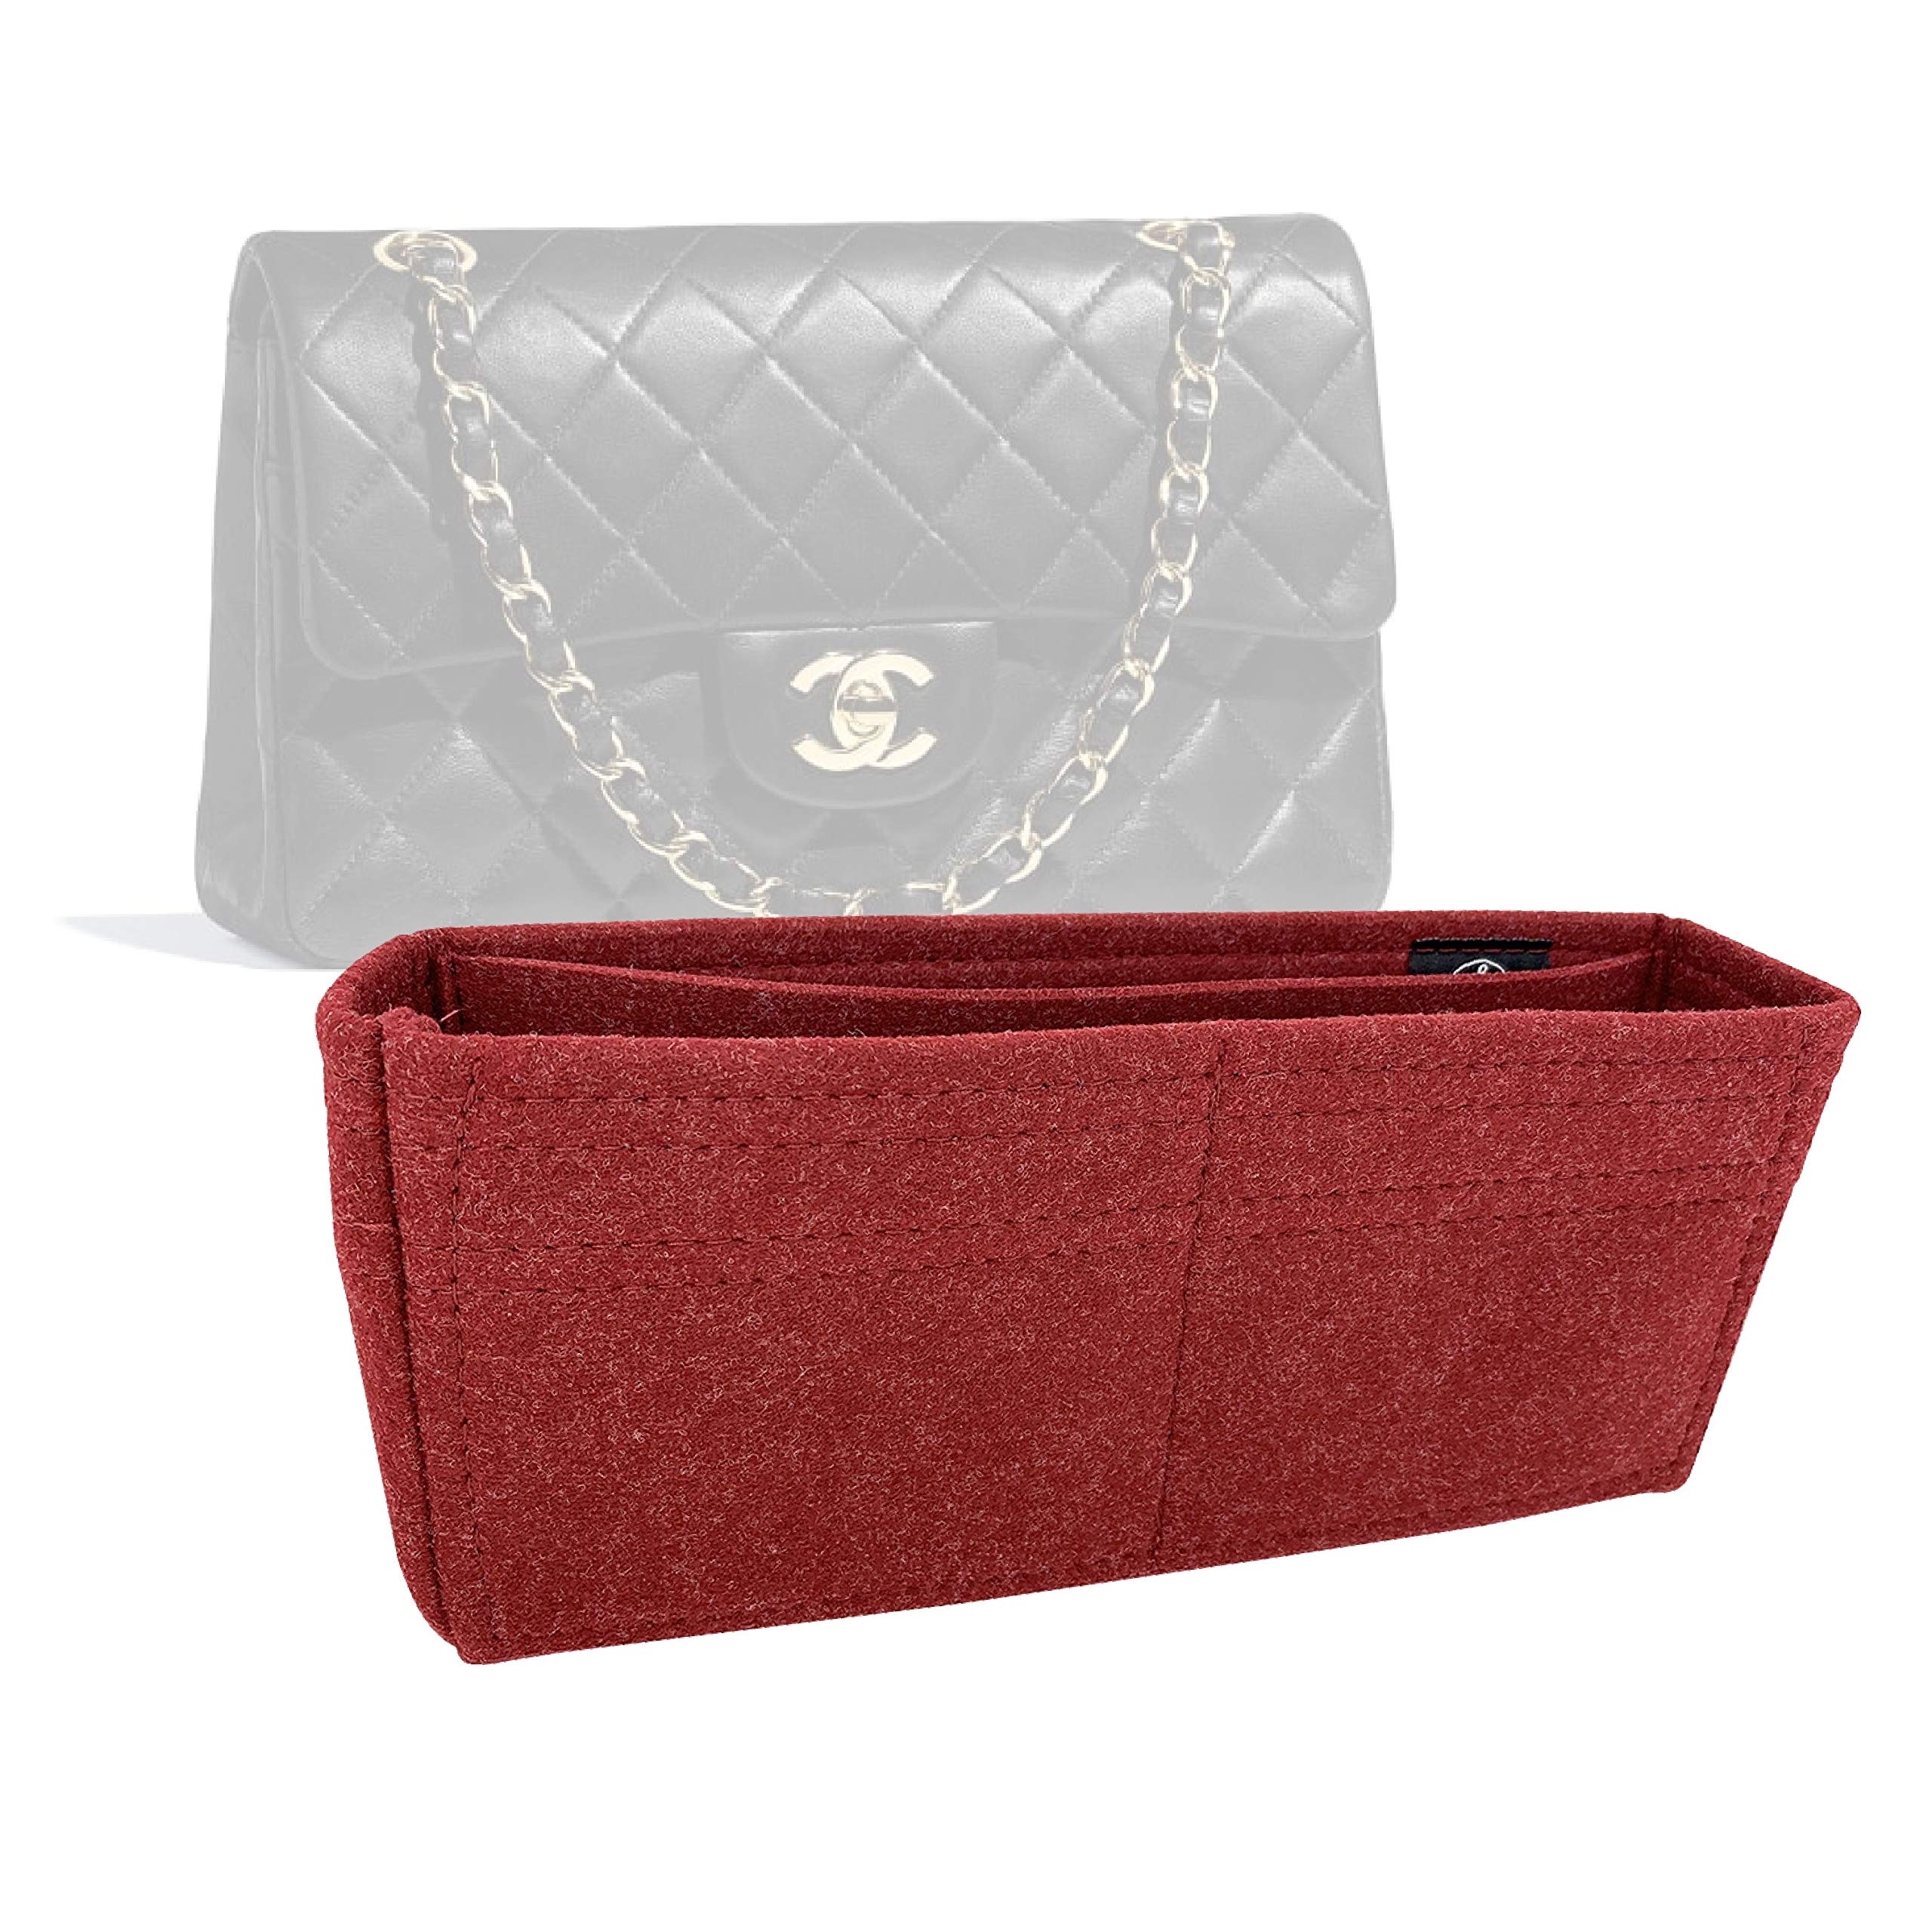 PROS AND CONS MEDIUM CHANEL CLASSIC FLAP  Bag Religion